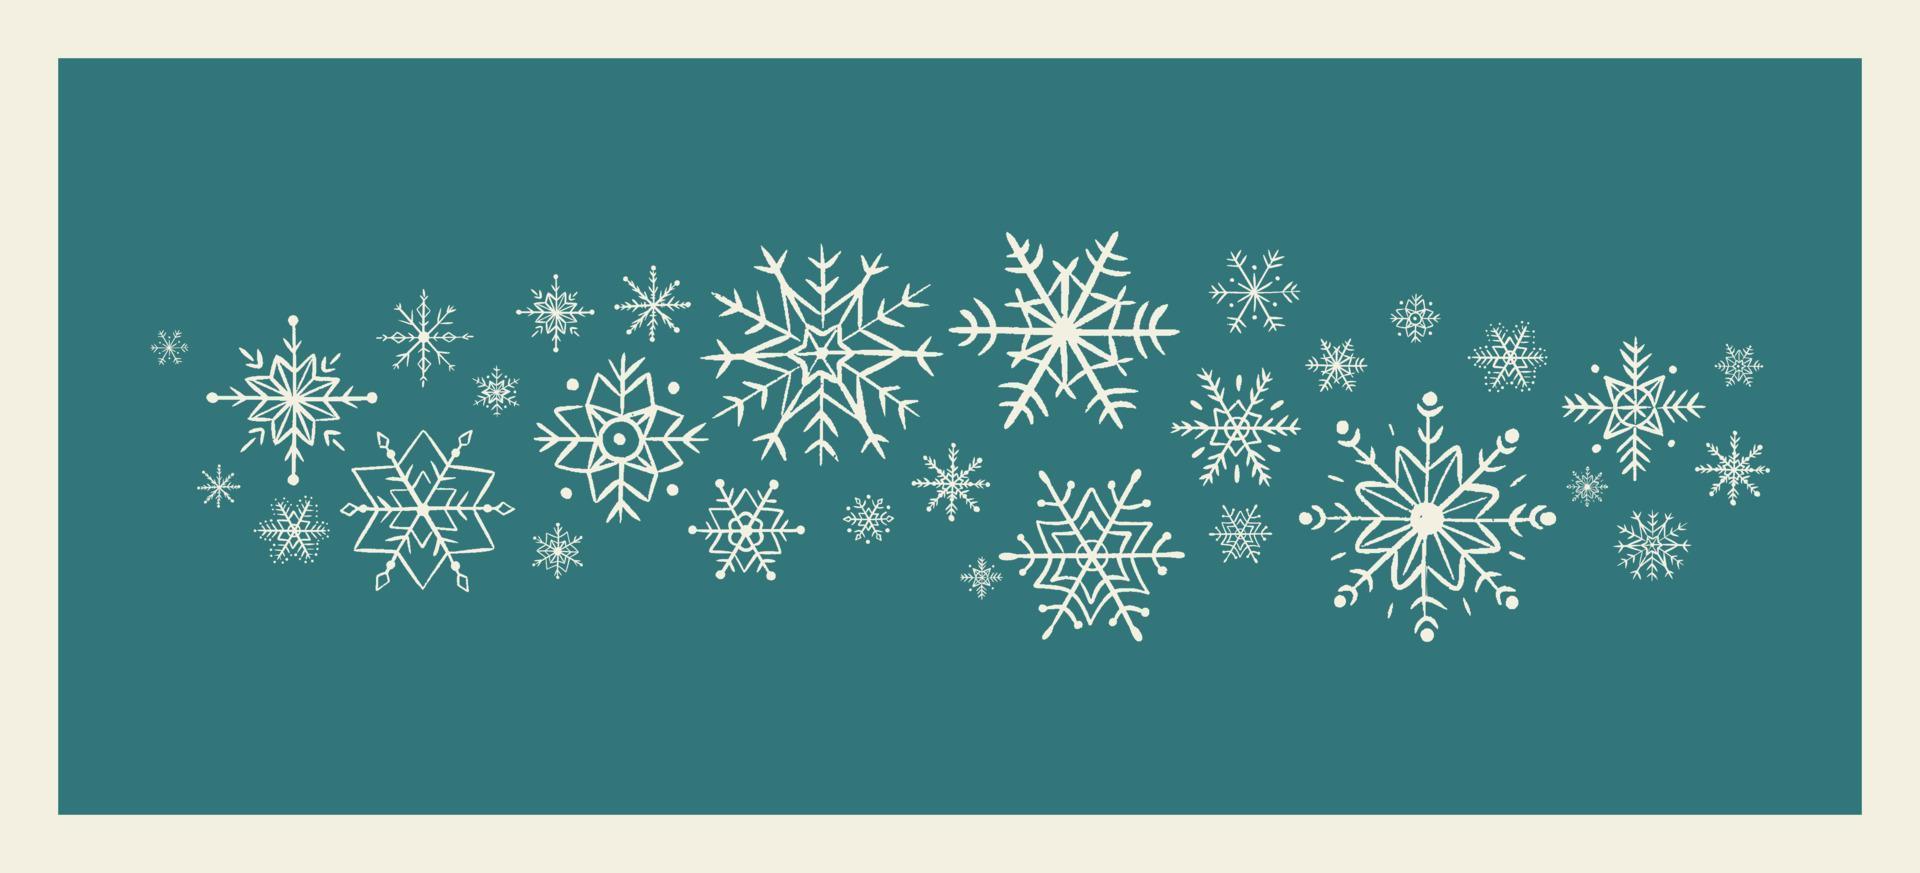 Collection hand drawn snowflakes isolated on blue background. Christmas wave made of snowflakes in doodle style vector